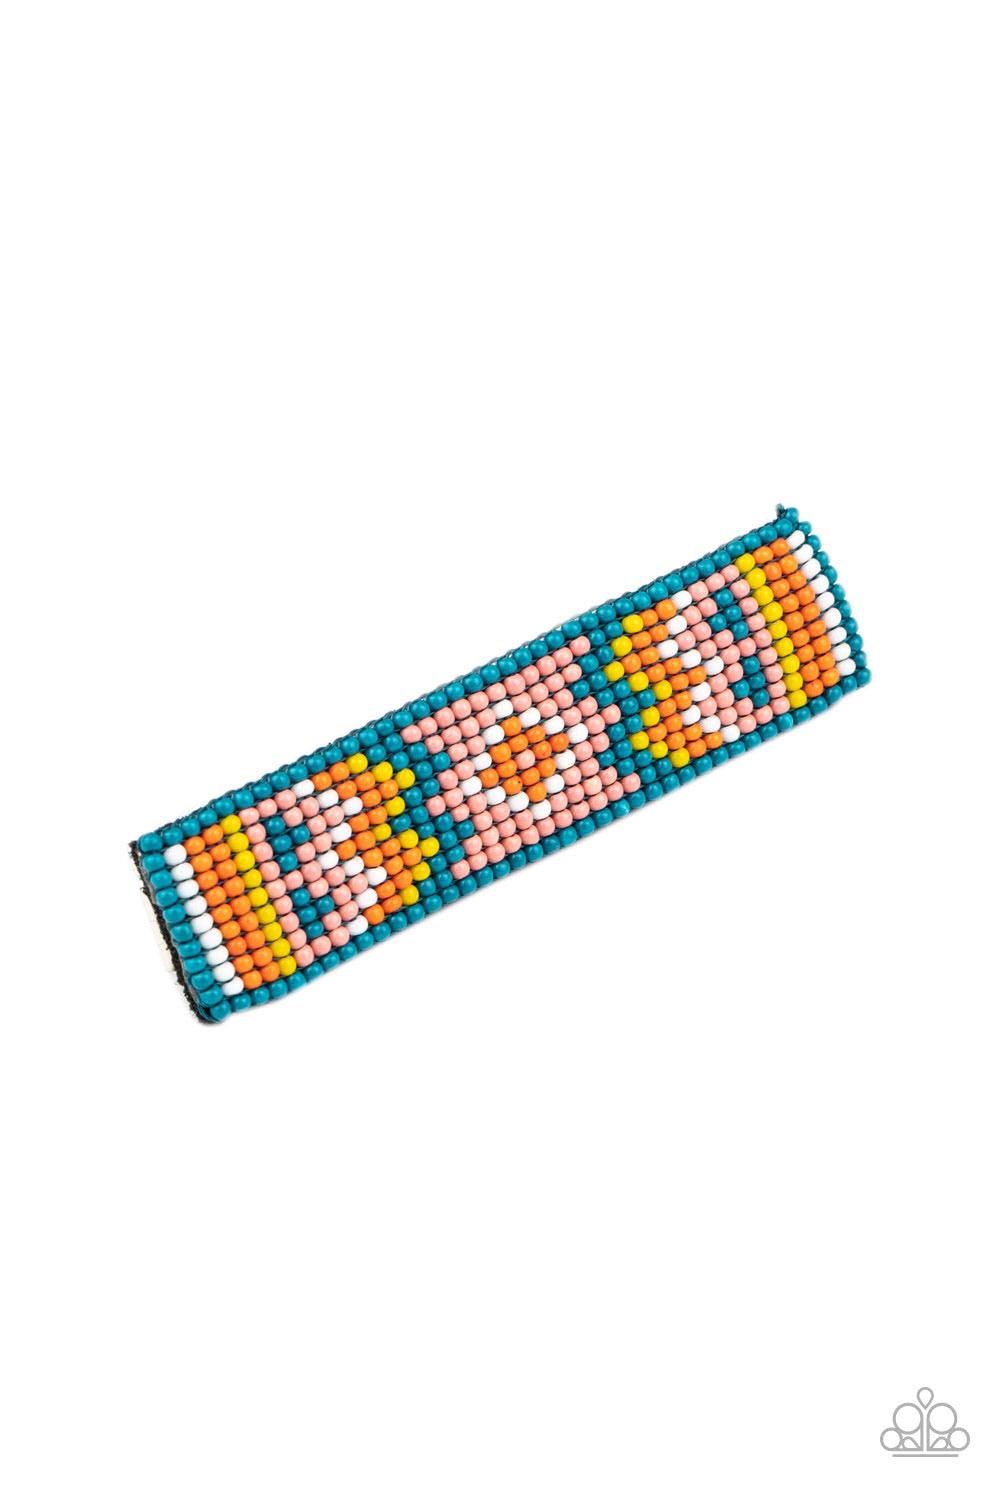 Paparazzi Accessories Lay of the Desert - Multi A dainty collection of blue, yellow, orange, white, and Rose Tan beads delicately embellish the front of a black frame, stacking into a colorful textile pattern. Features a standard hair clip on the back. So